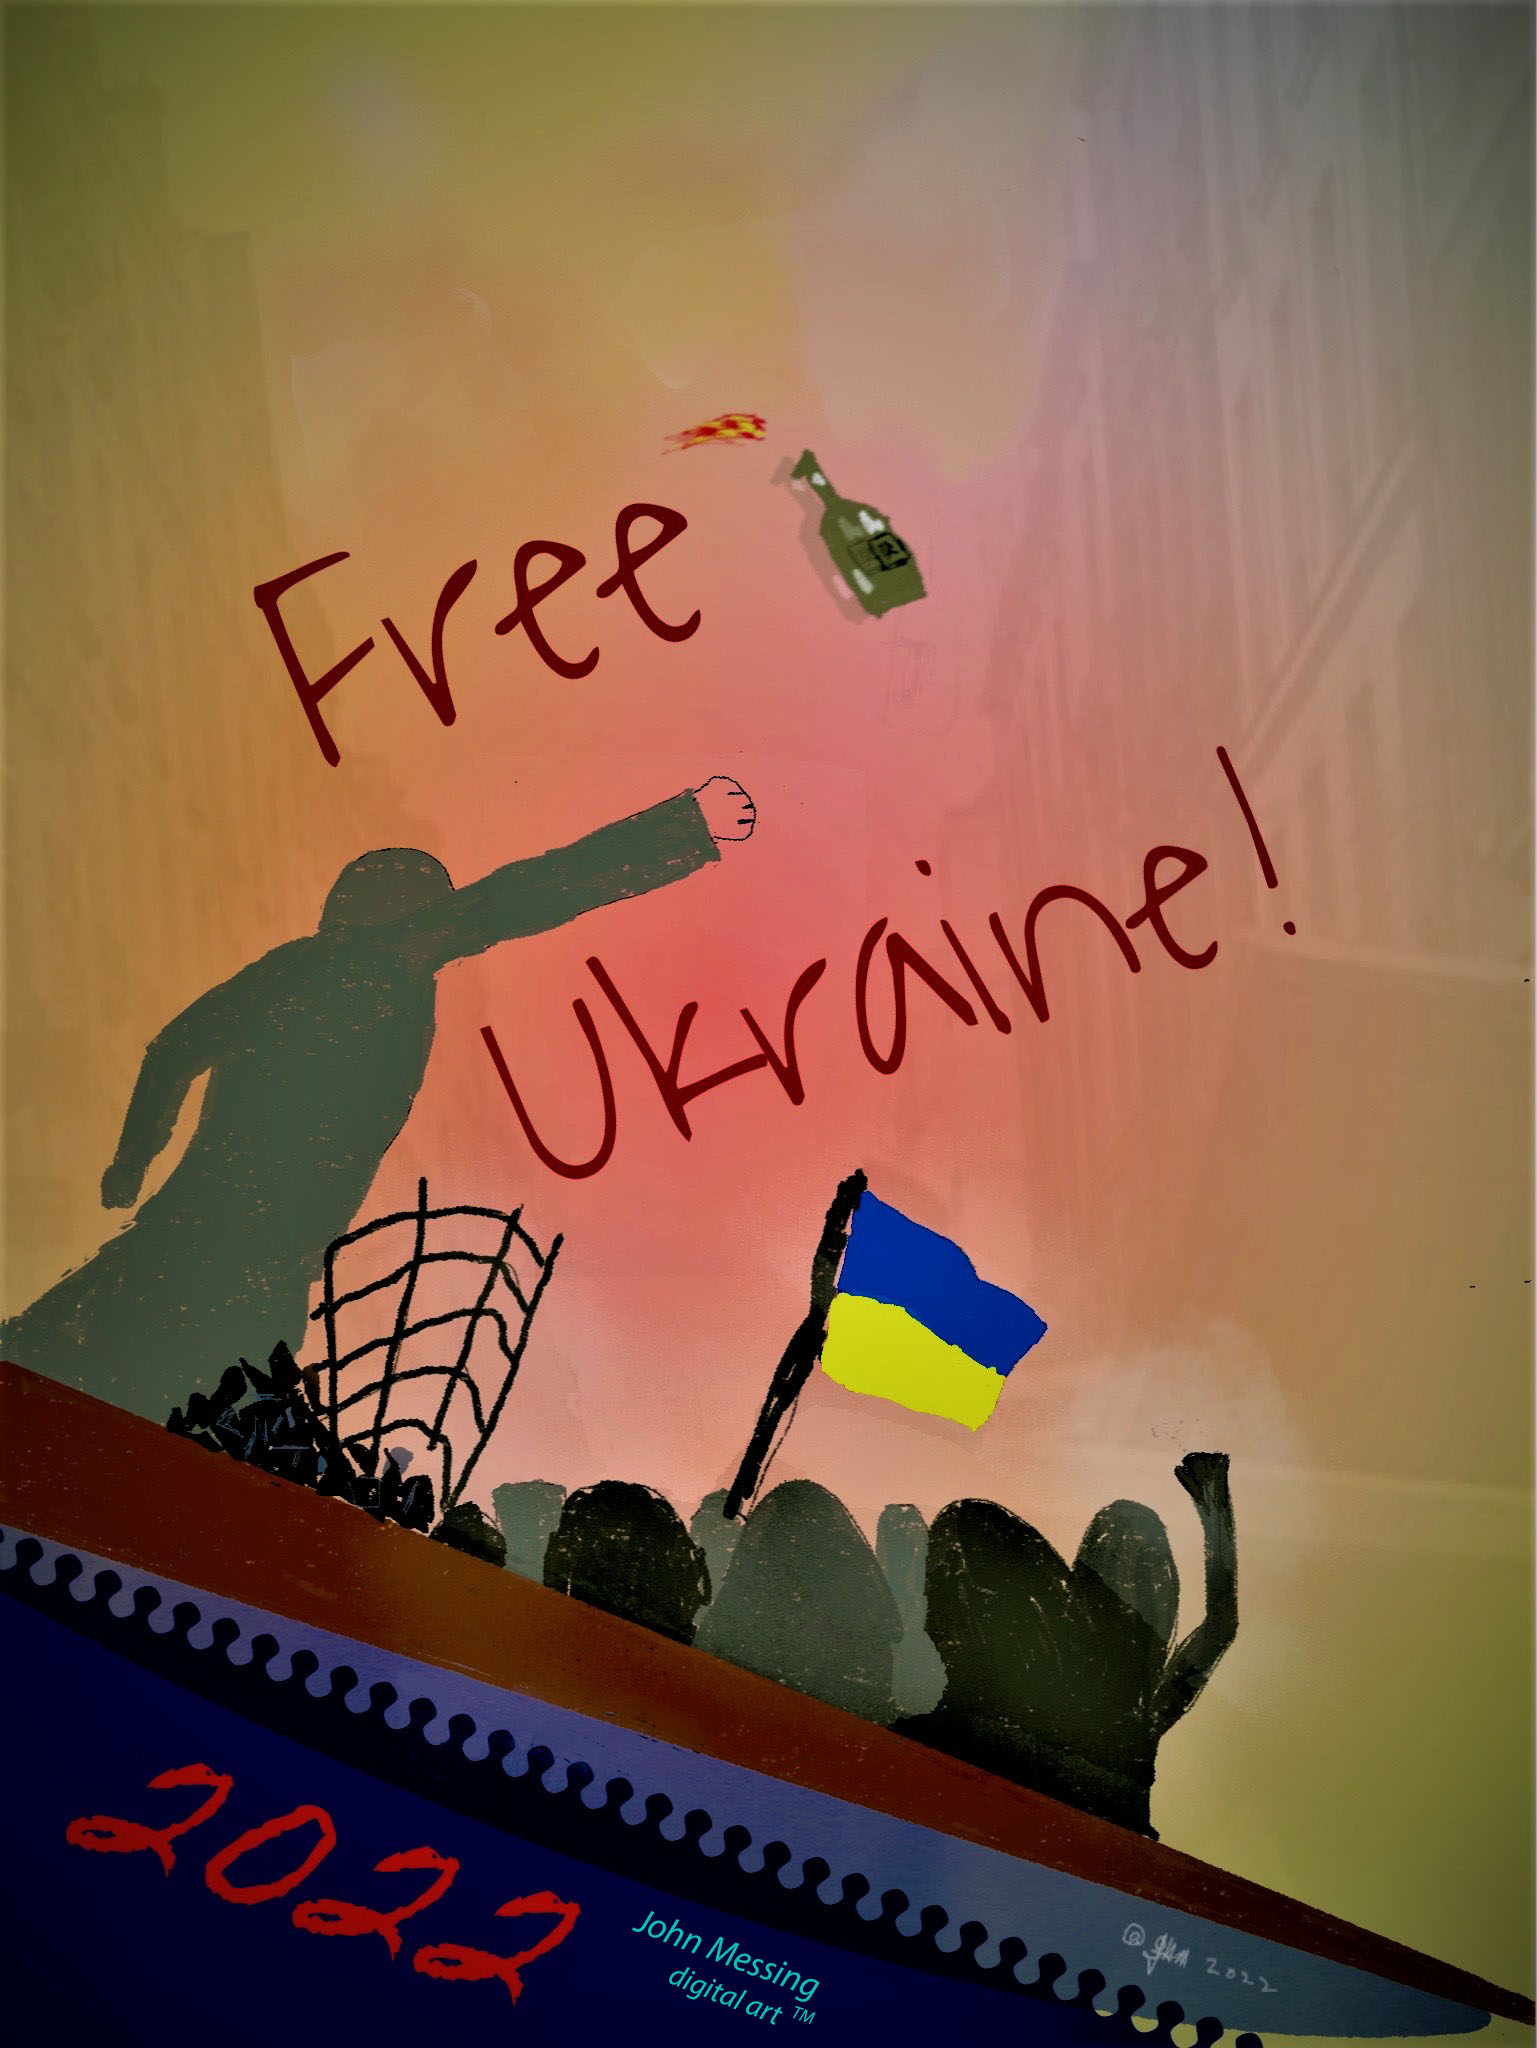 Free Ukraine! painting by John Messing, registered copyright